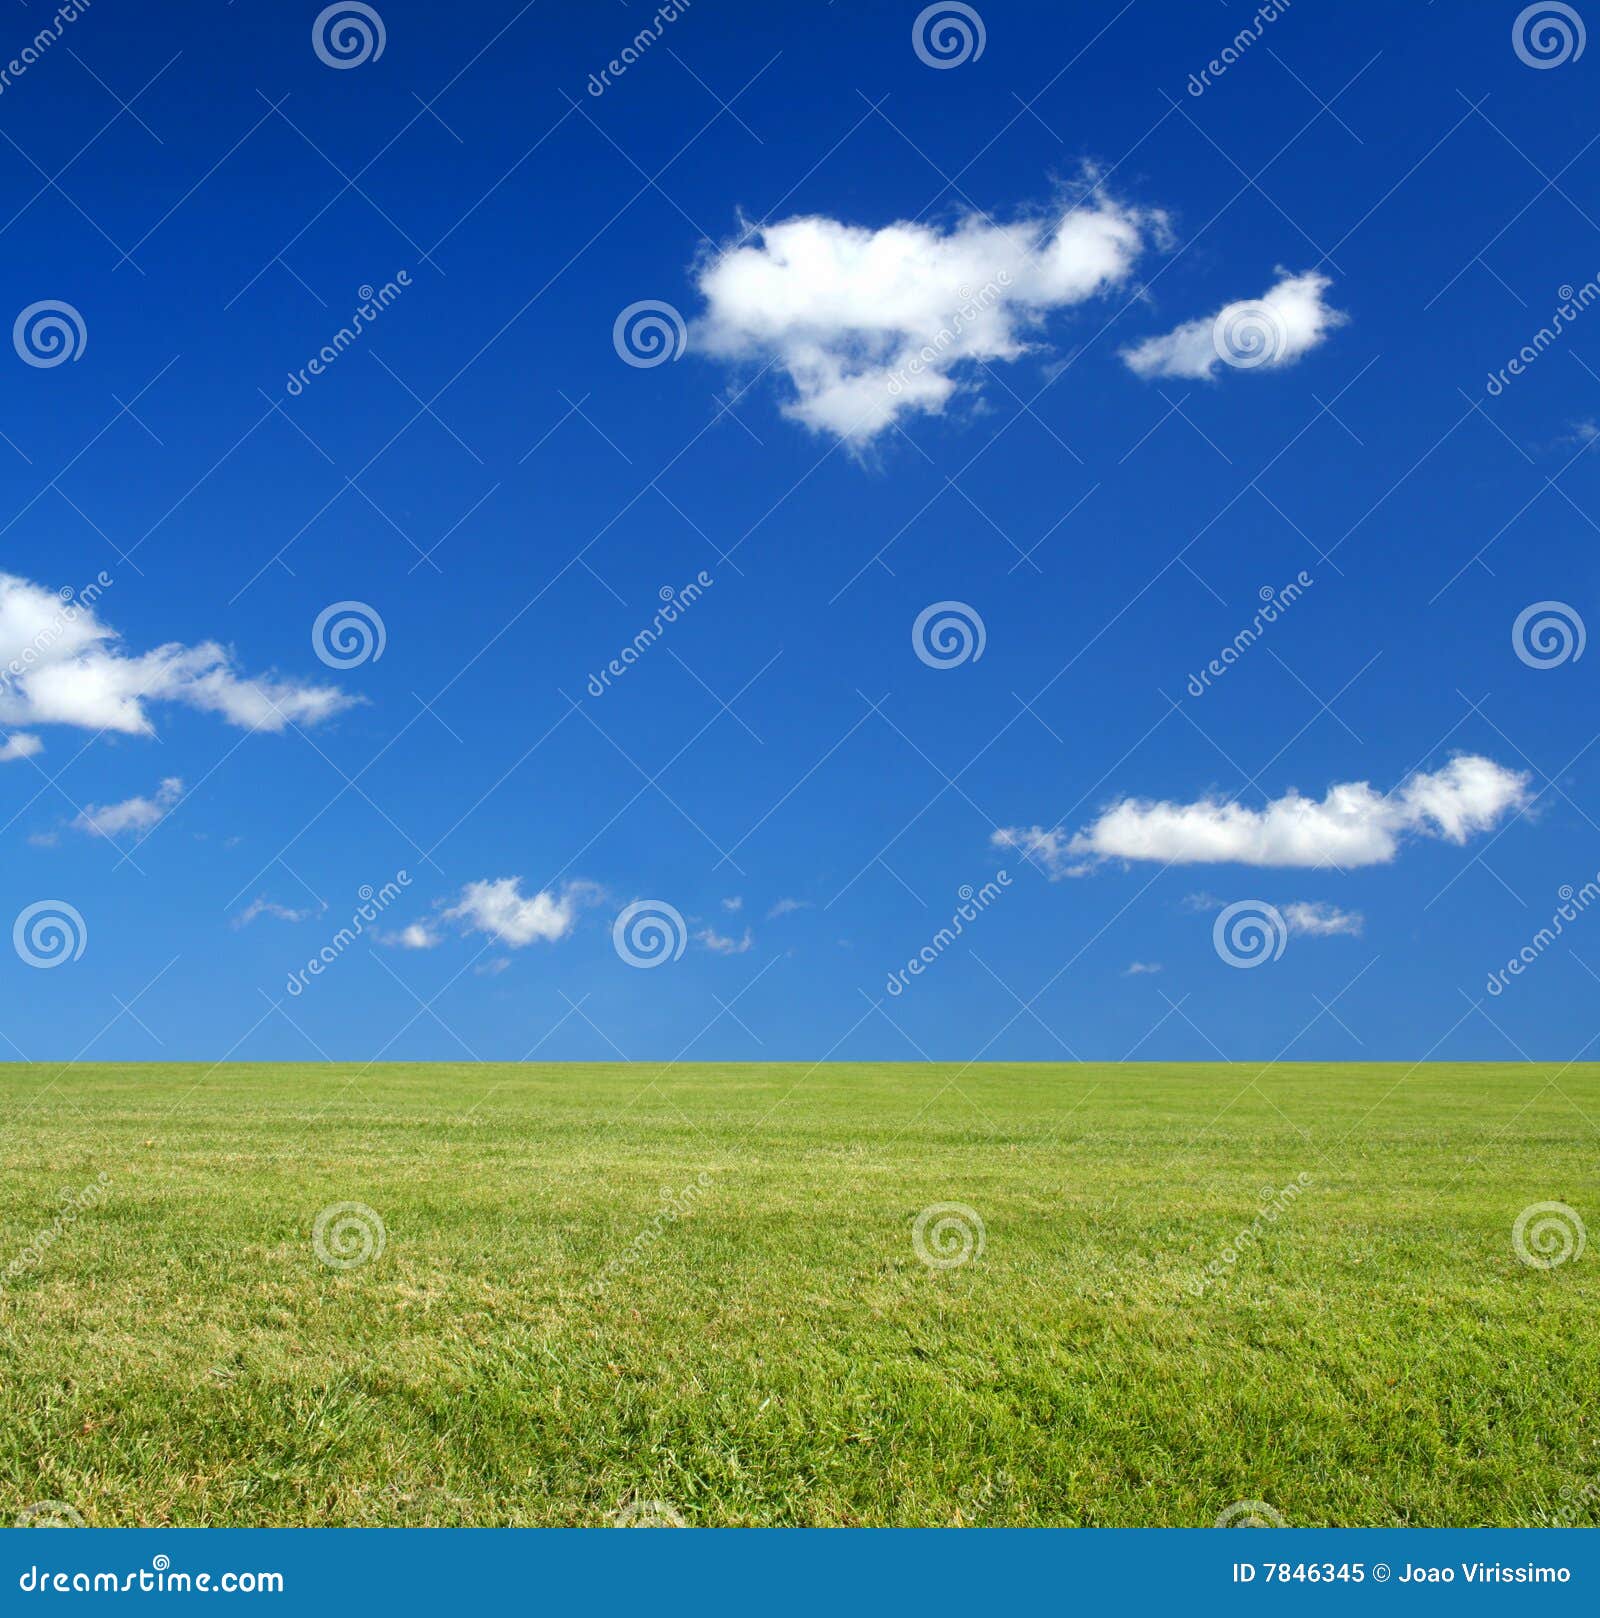 vast green grass field and blue sky eco-friendly c